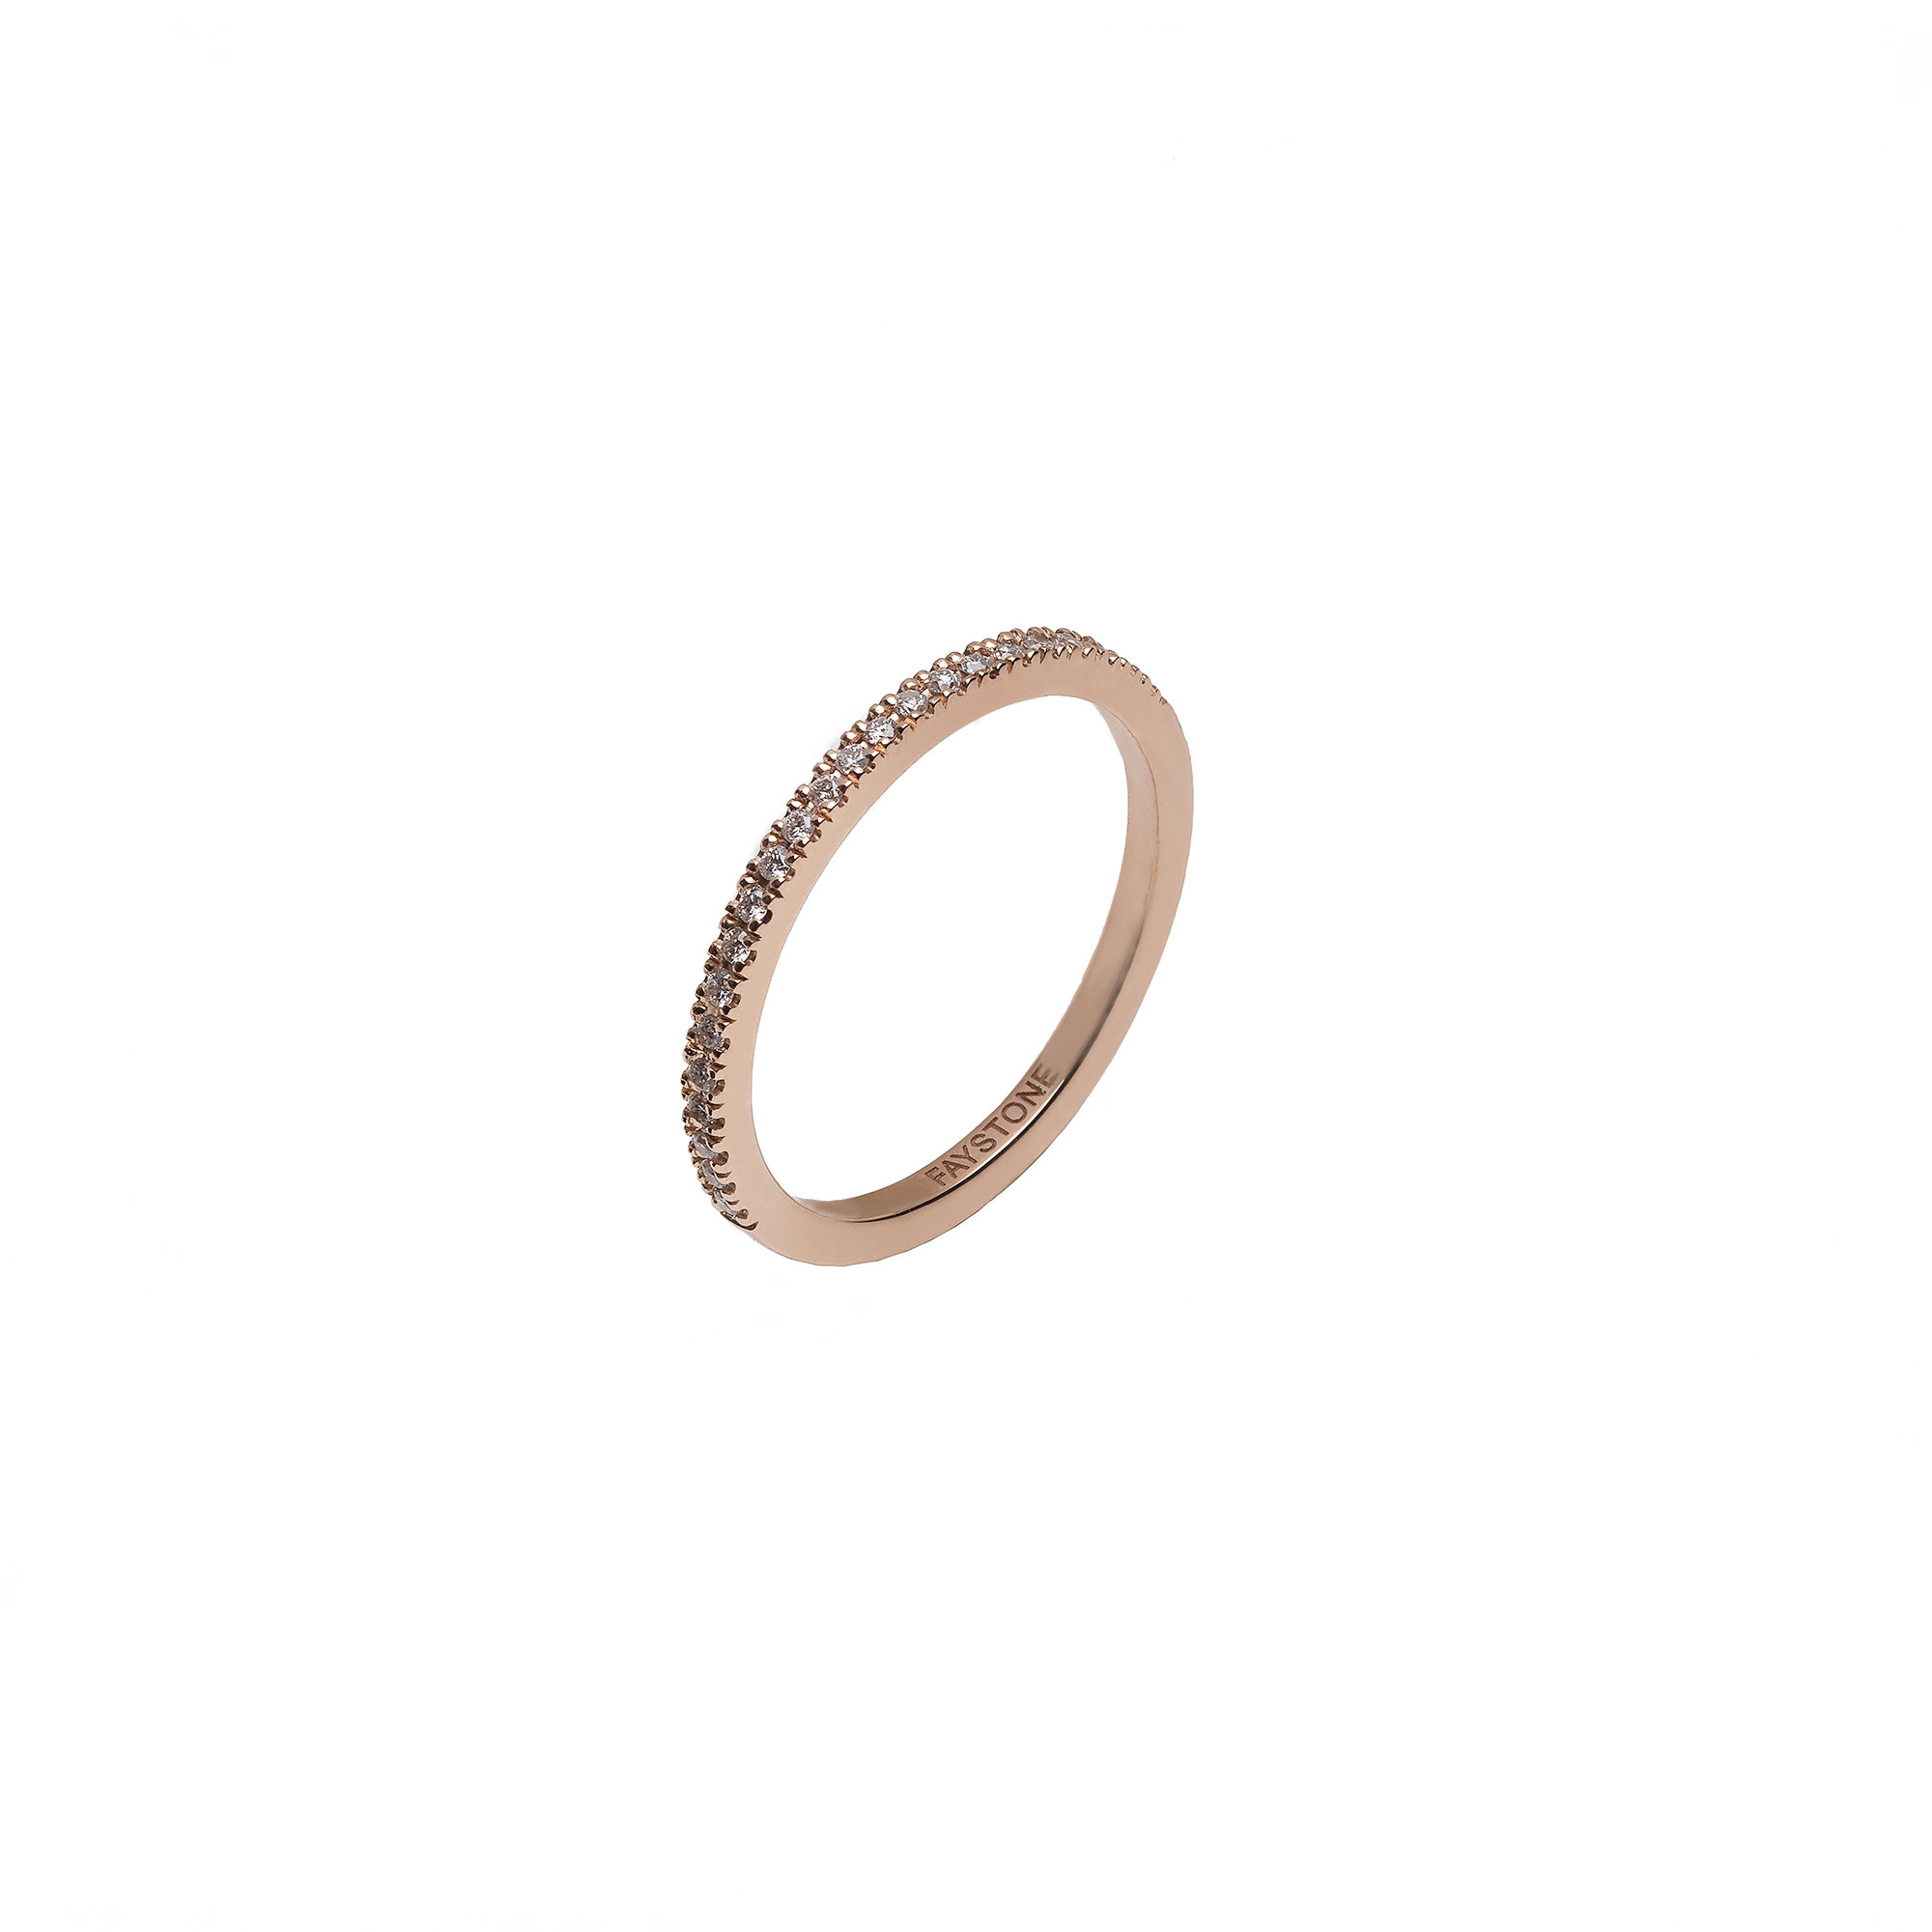 Orion Rose Gold Ring | Faystone Jewelllery | Rings | Faystone.com